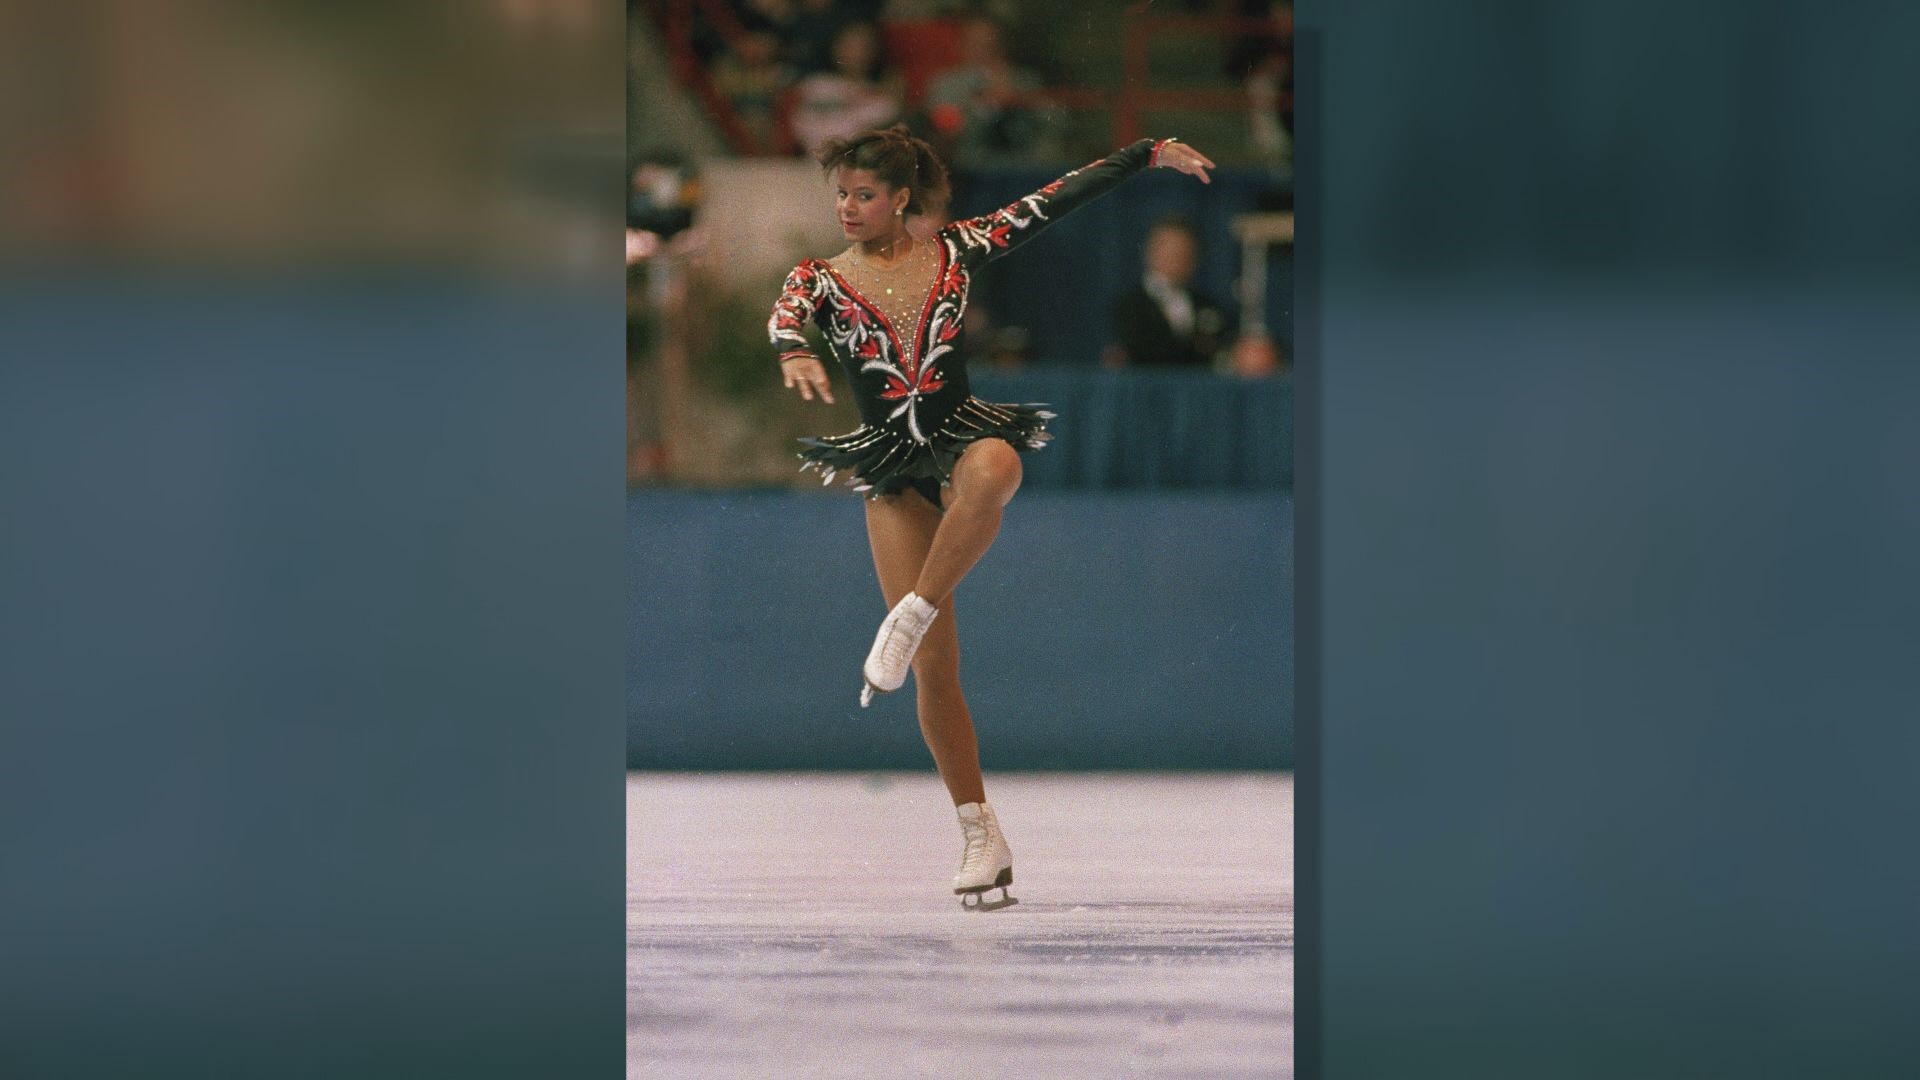 Kristen and Ellen honor Debi Thomas who became the first African-American athelete to win a medal at the Olympic Winter Games in 1988.